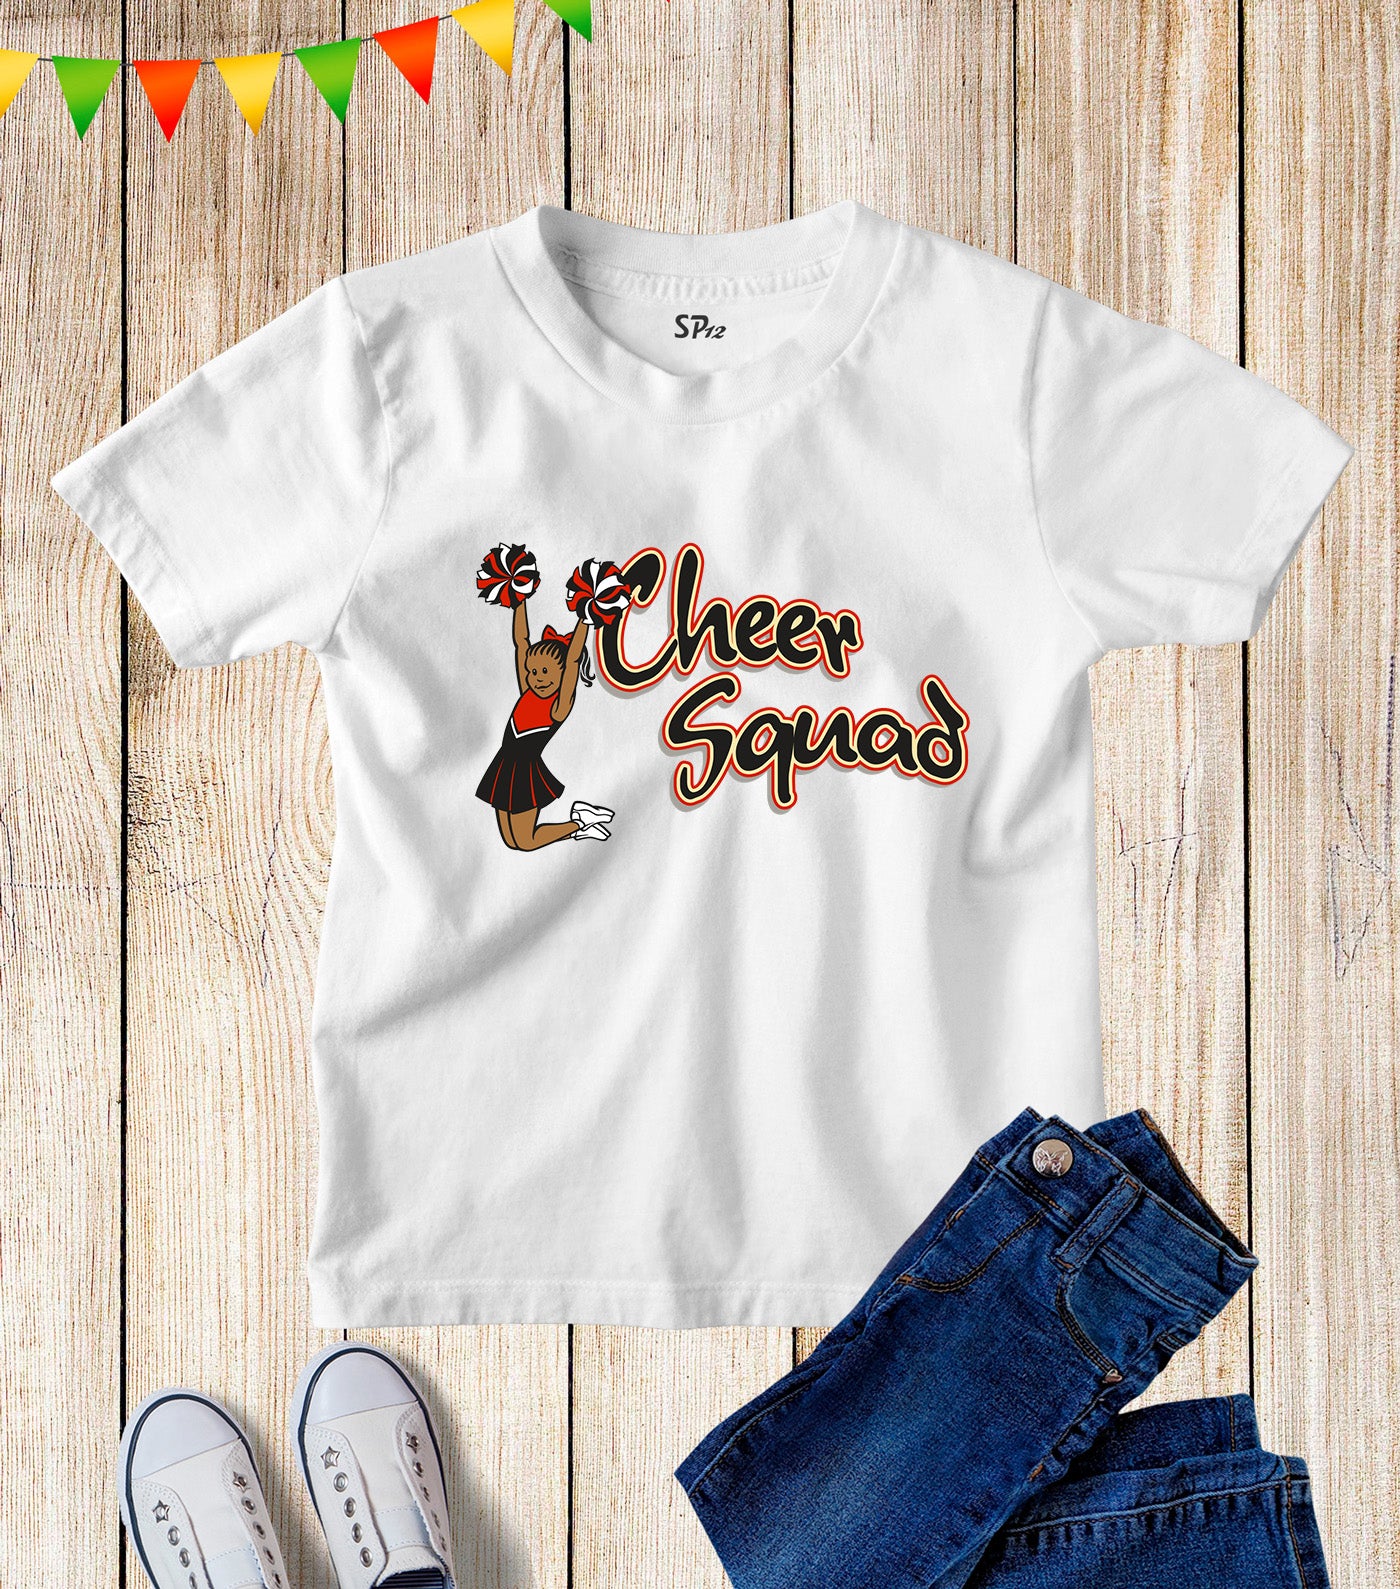 Kids Cheer Squad Game Dance Sports Fans T Shirt